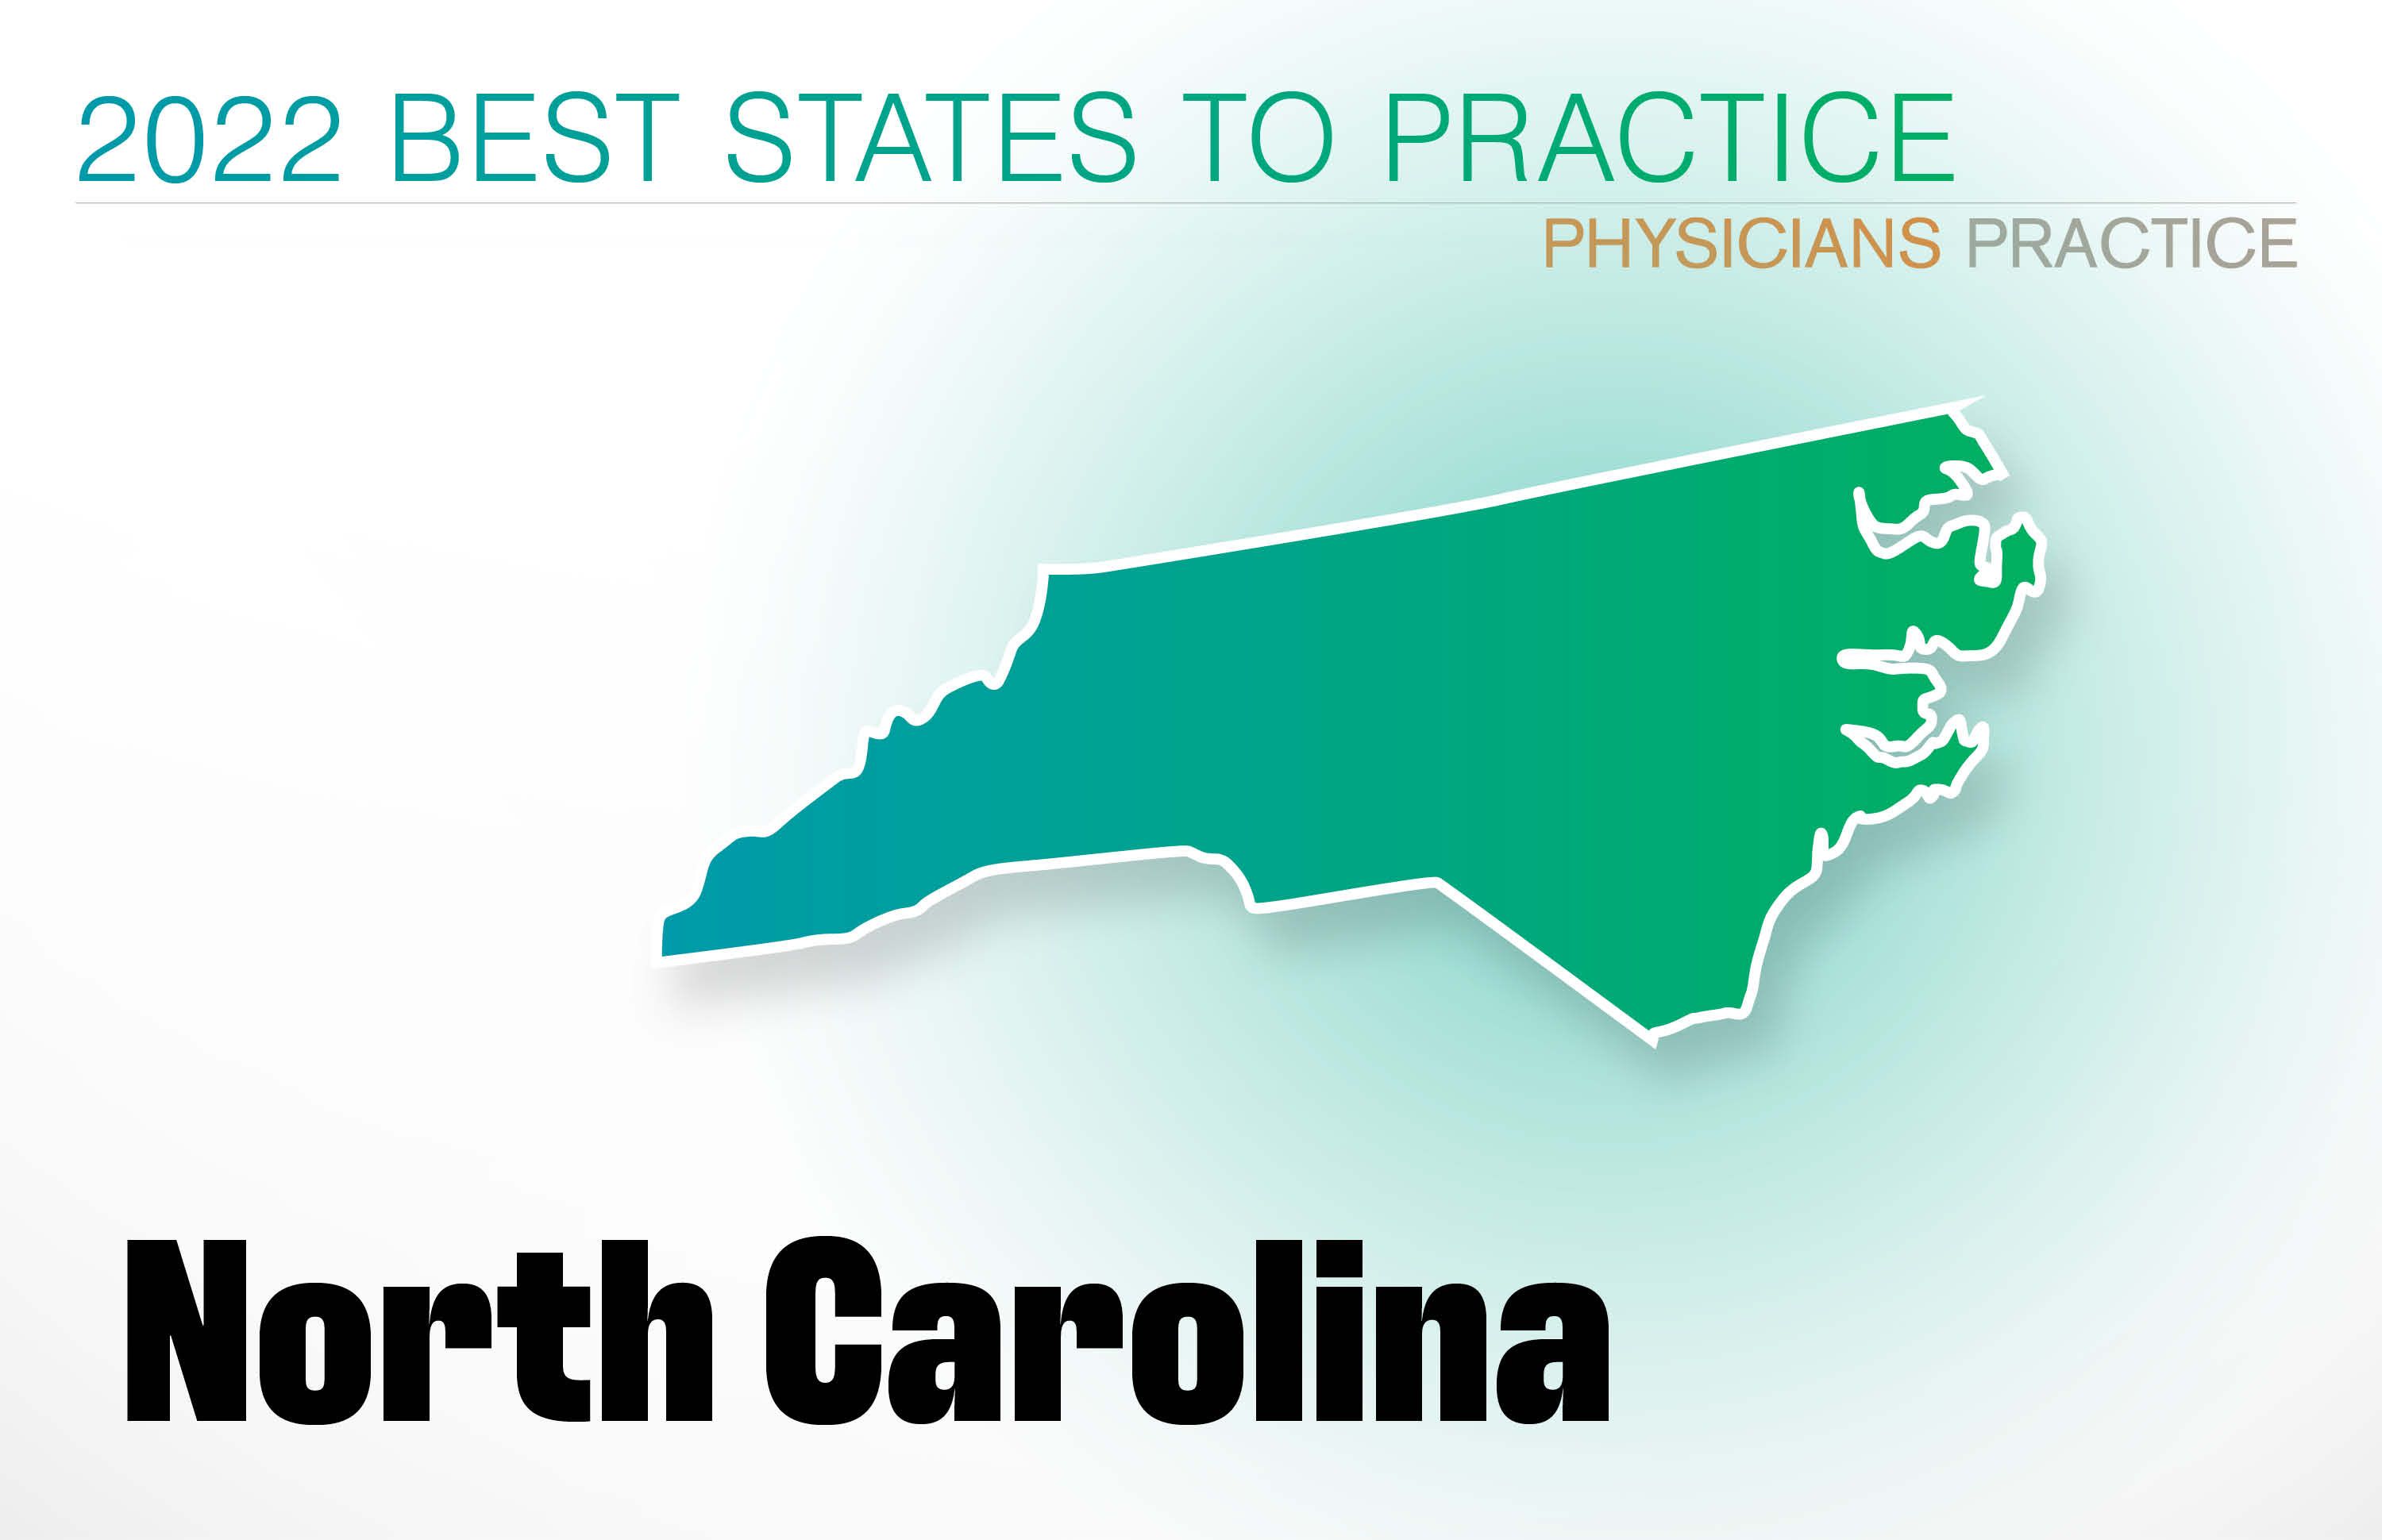 #12 North Carolina Rankings: Cost of living: 22 Physician density: 23 Amount of state business taxes collected: 11 Average malpractice insurance rates: 14 Quality of life: 18 GPCI: 21